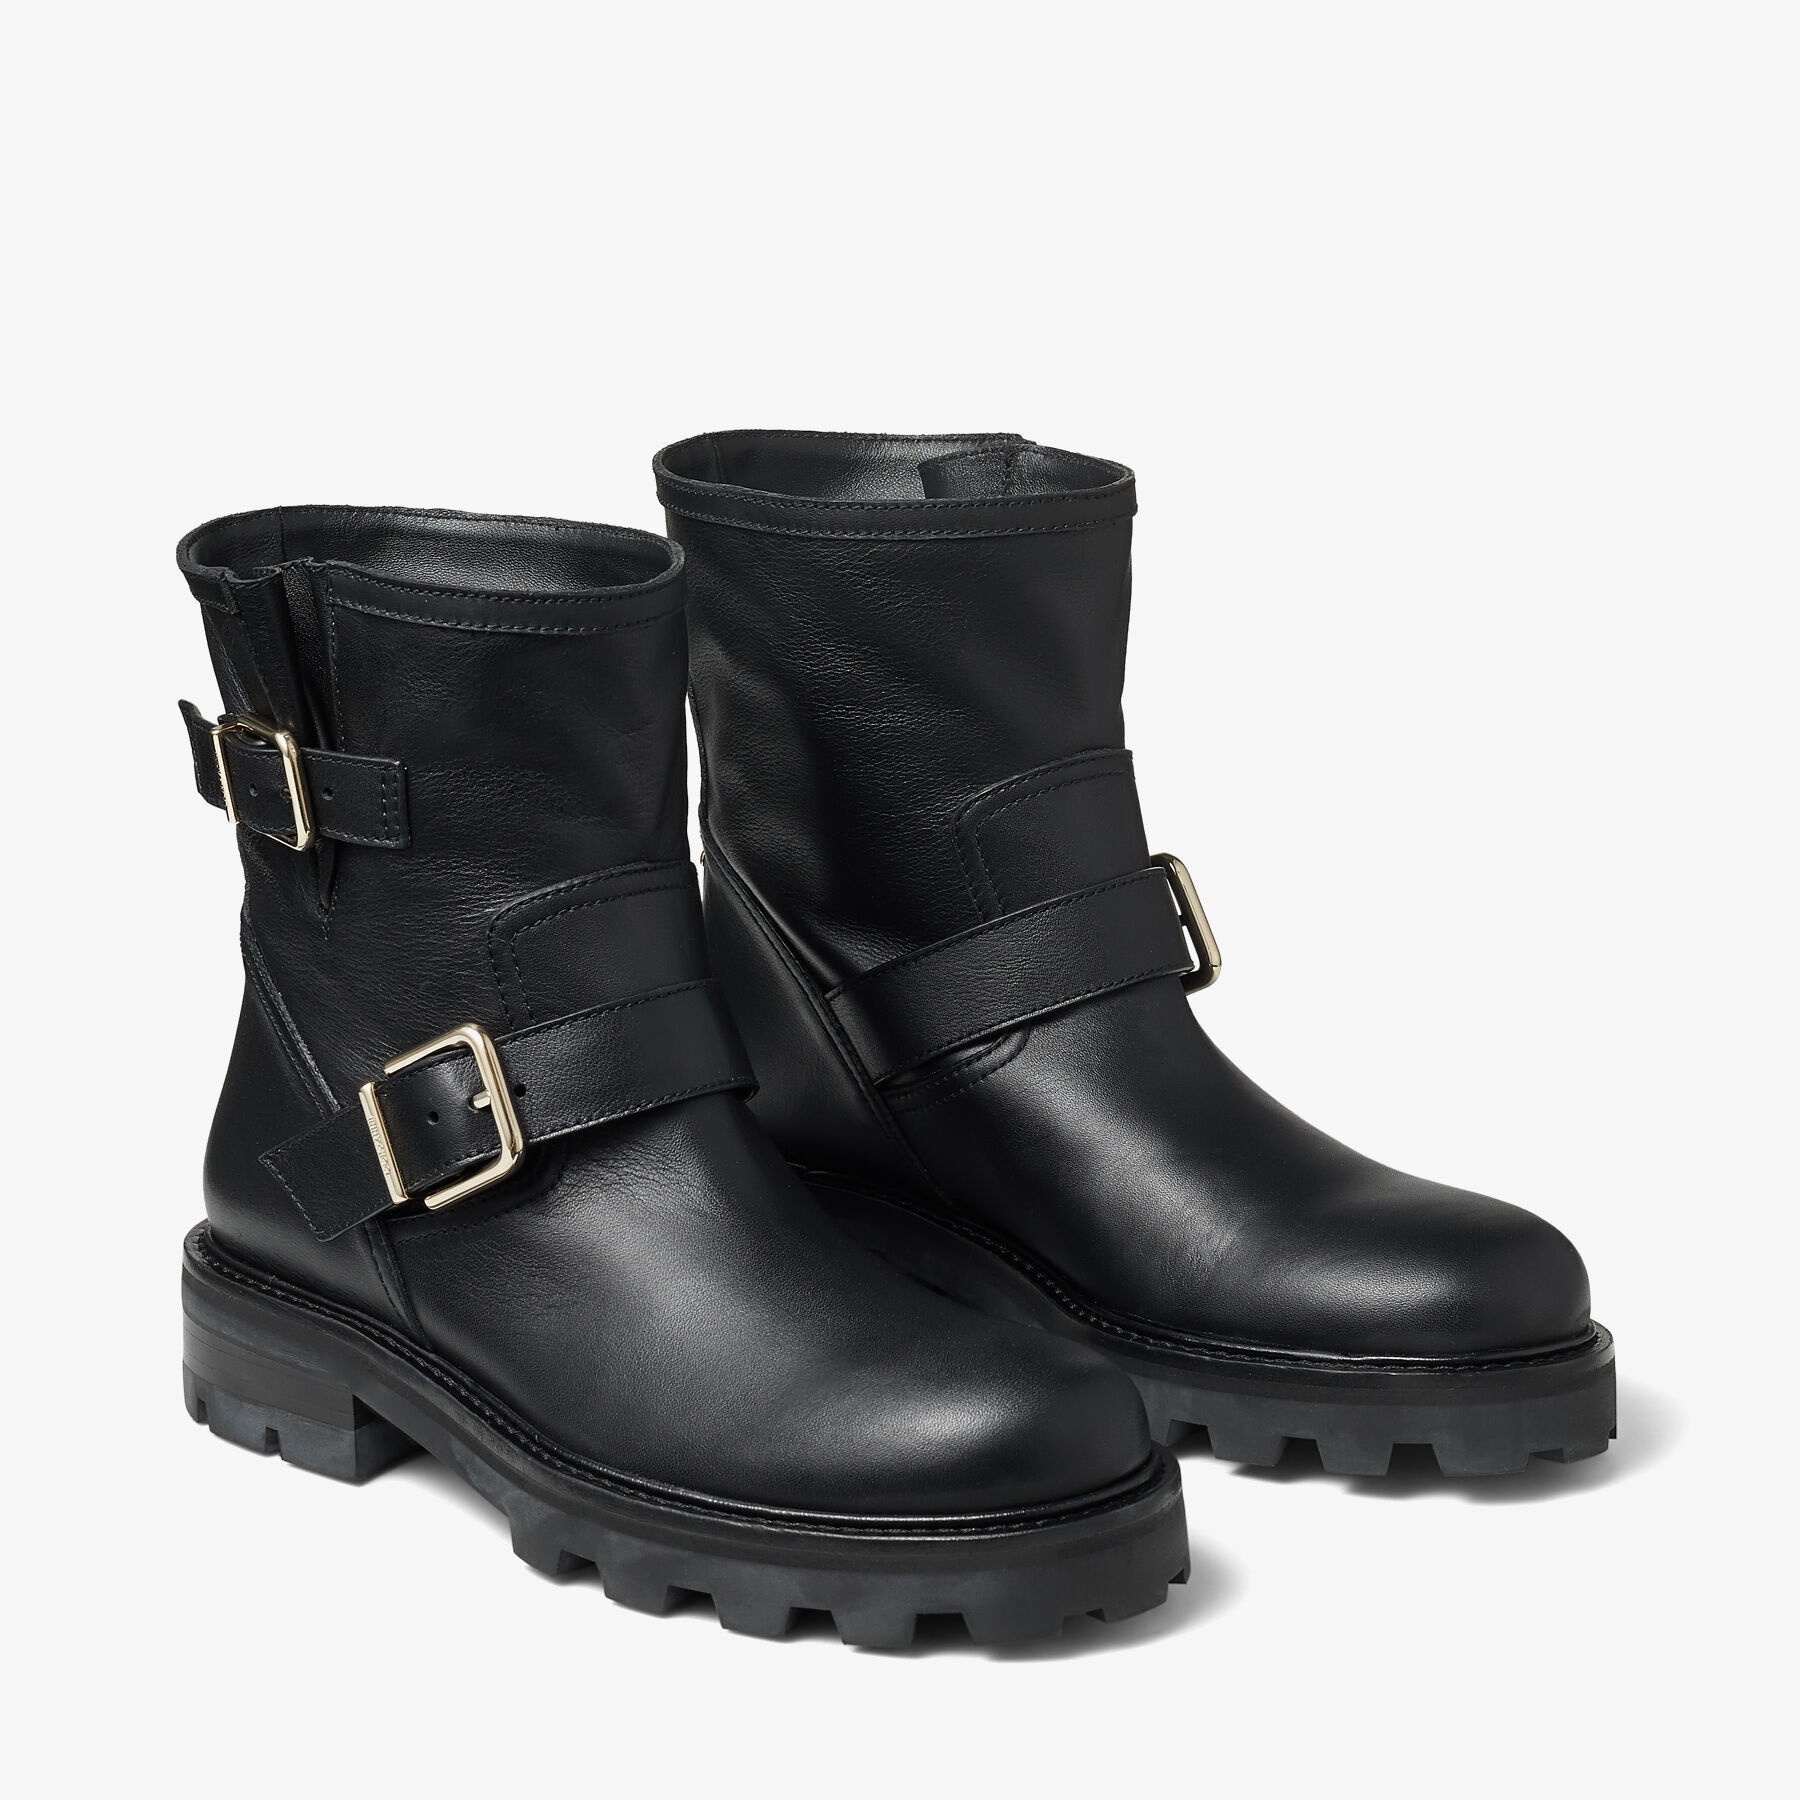 Youth II
Black Smooth Leather Biker Boots with Gold Buckles - 3